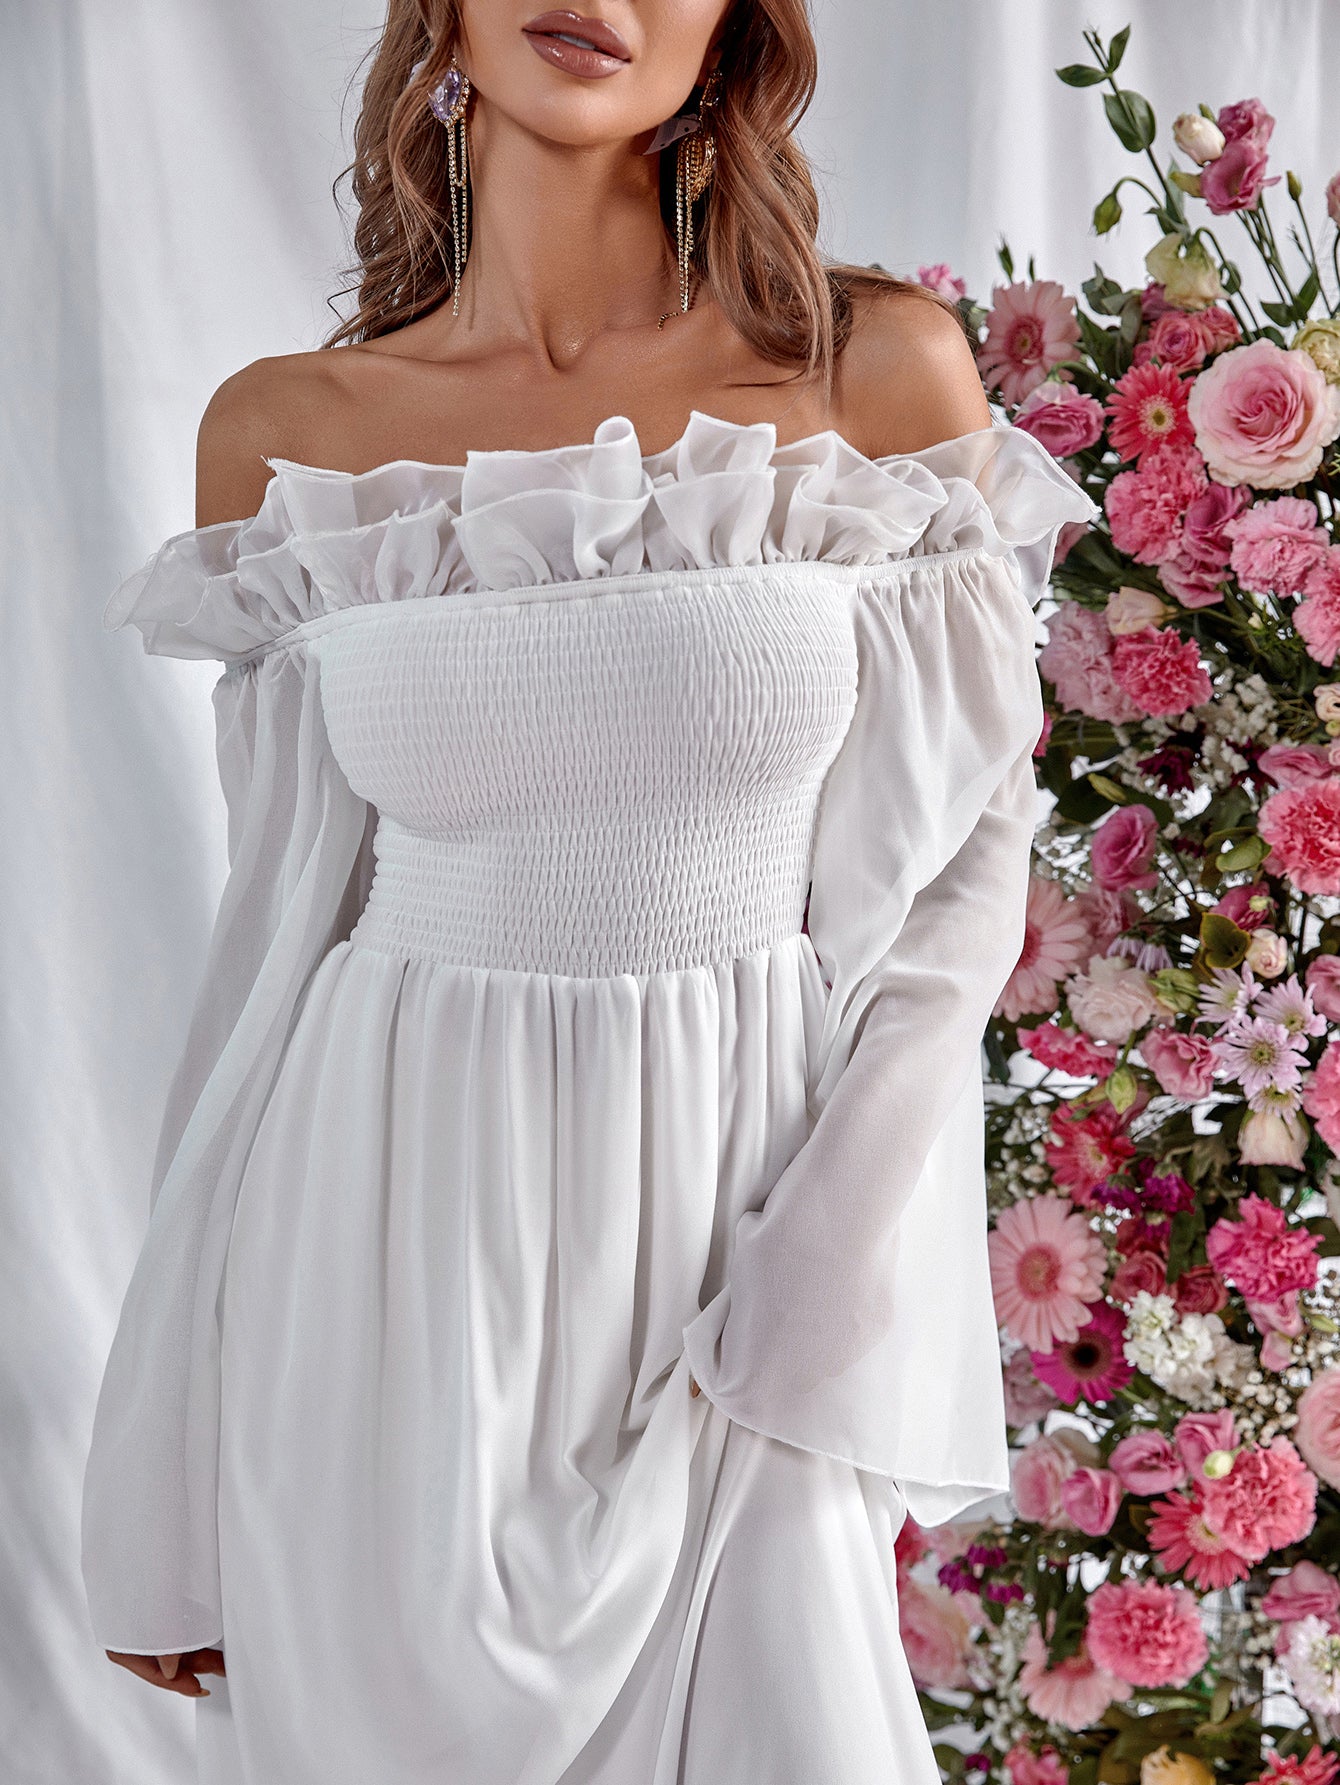 Off Shoulder Long Sleeve White Chiffon Dress With Ruffles On Top